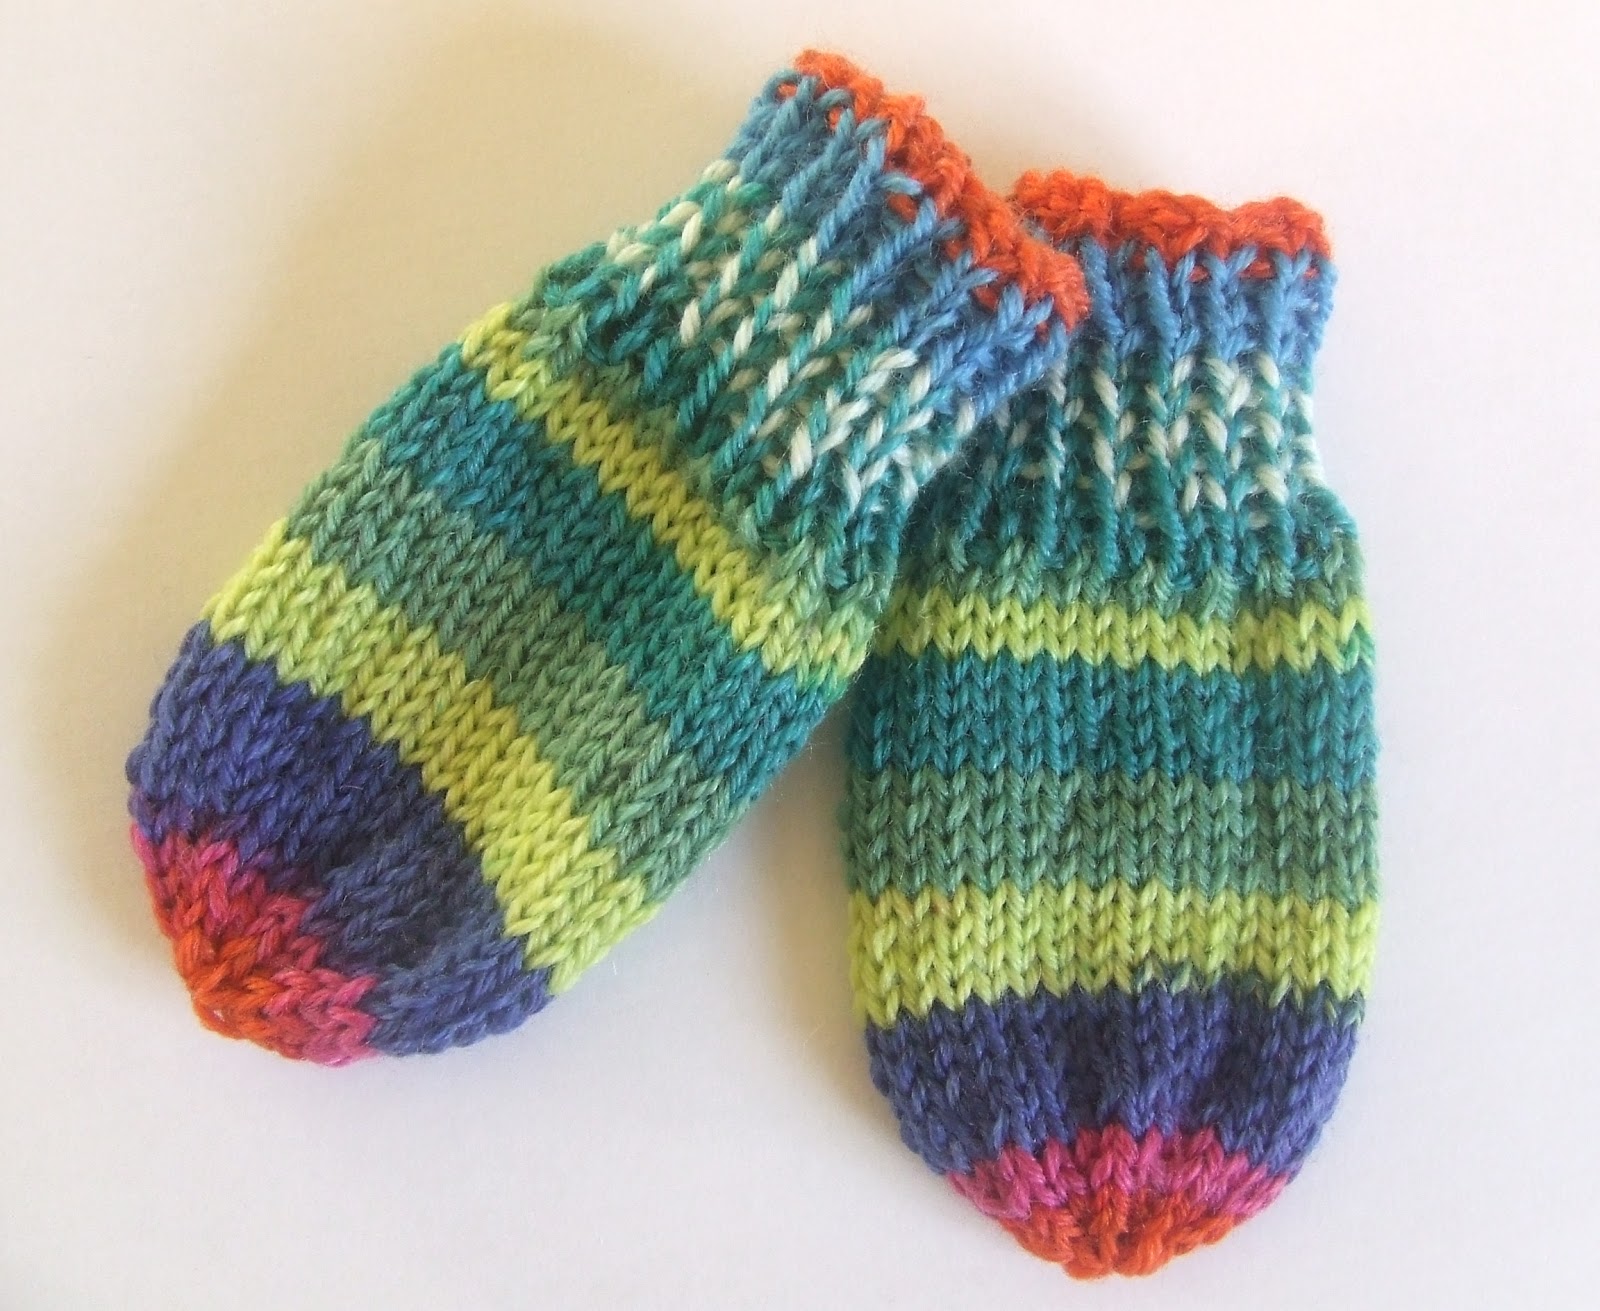 The Yarn Owl's Nest: How to knit thumbless mittens - Tommy No-Thumb